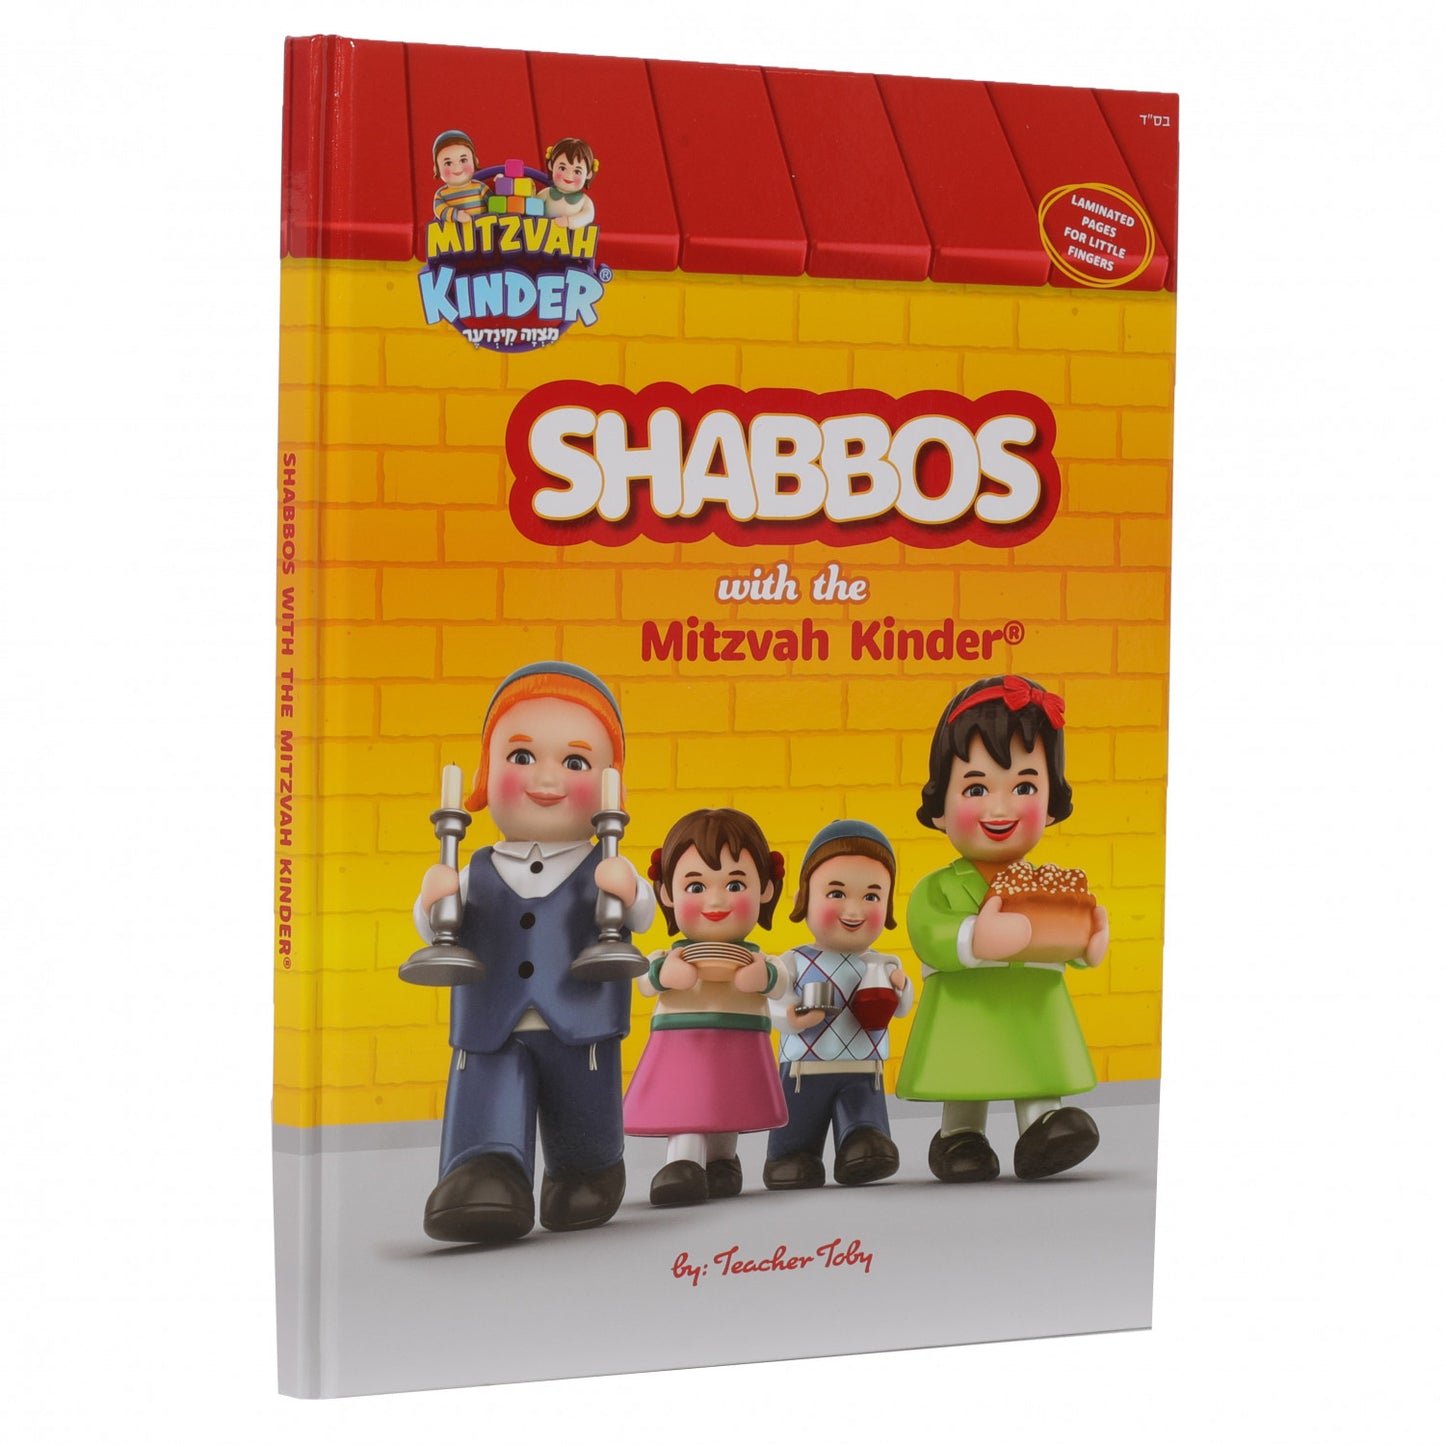 Shabbos with the Mitzvah Kinder